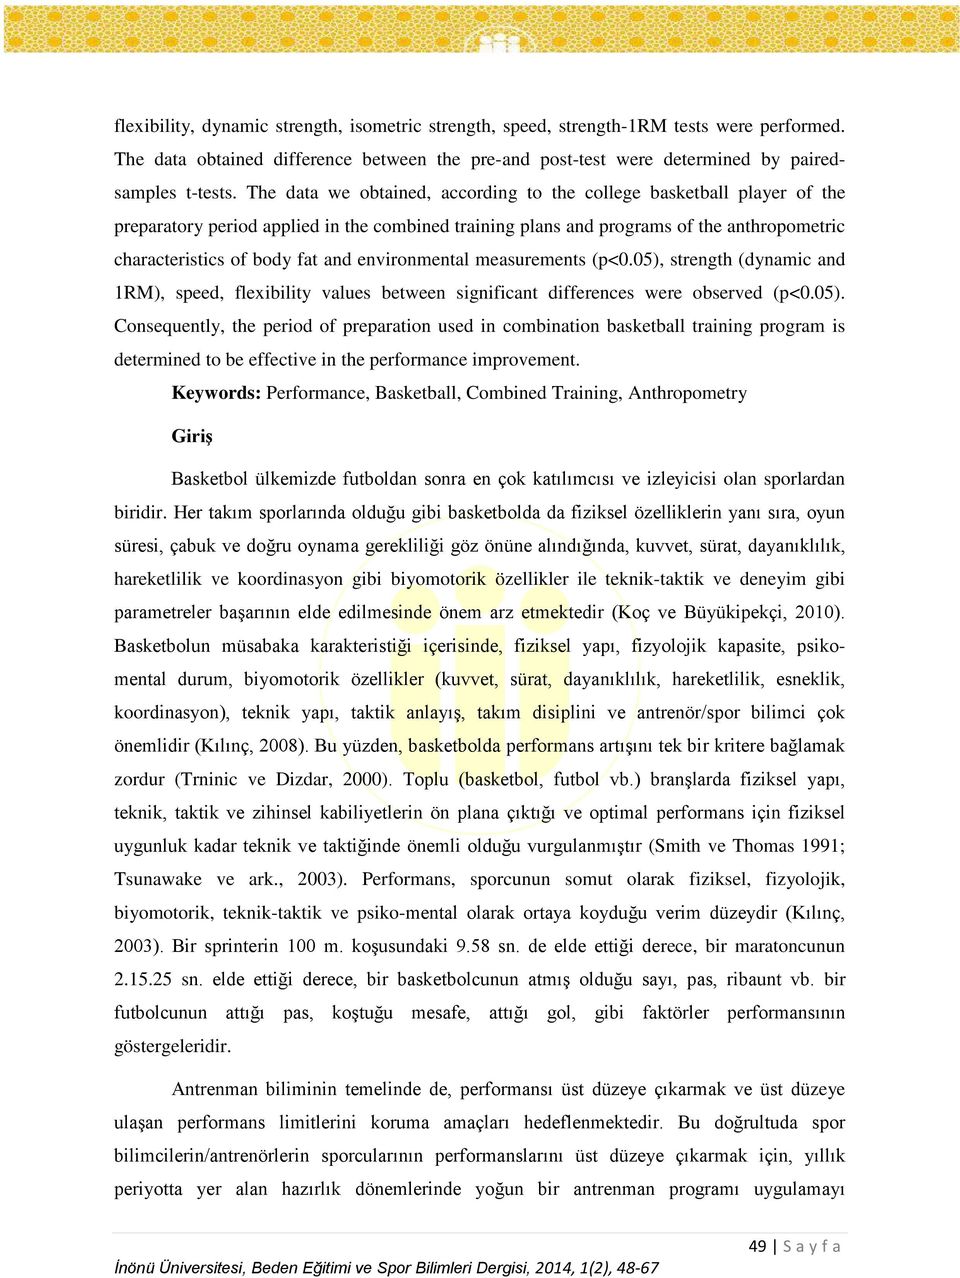 environmental measurements (p<0.05), strength (dynamic and 1RM), speed, flexibility values between significant differences were observed (p<0.05). Consequently, the period of preparation used in combination basketball training program is determined to be effective in the performance improvement.